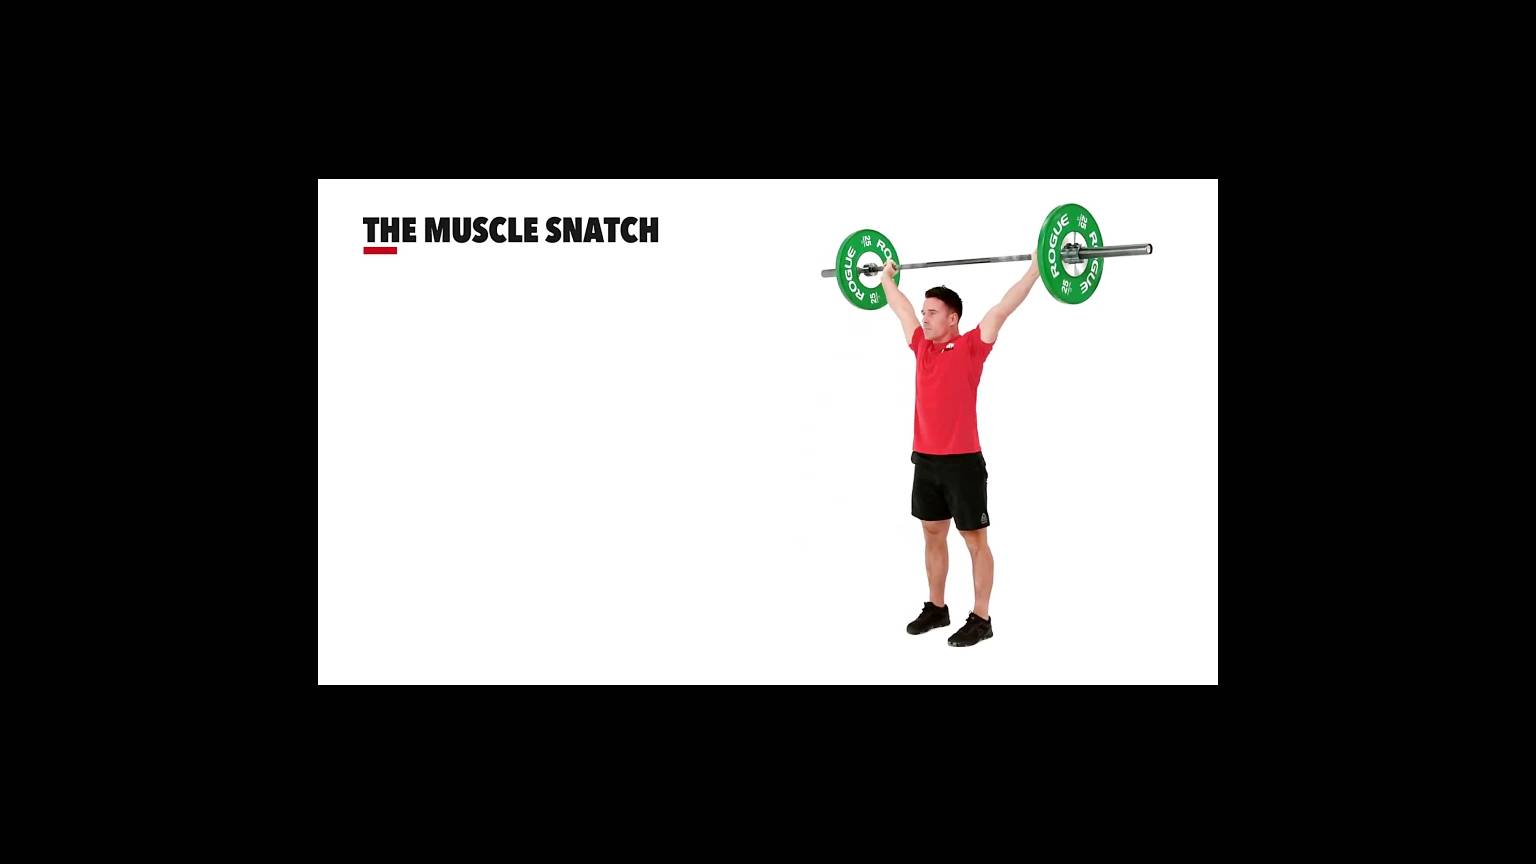 HOW TO SNATCH / A Visual Guide for athletes & coaches / Torokhtiy 